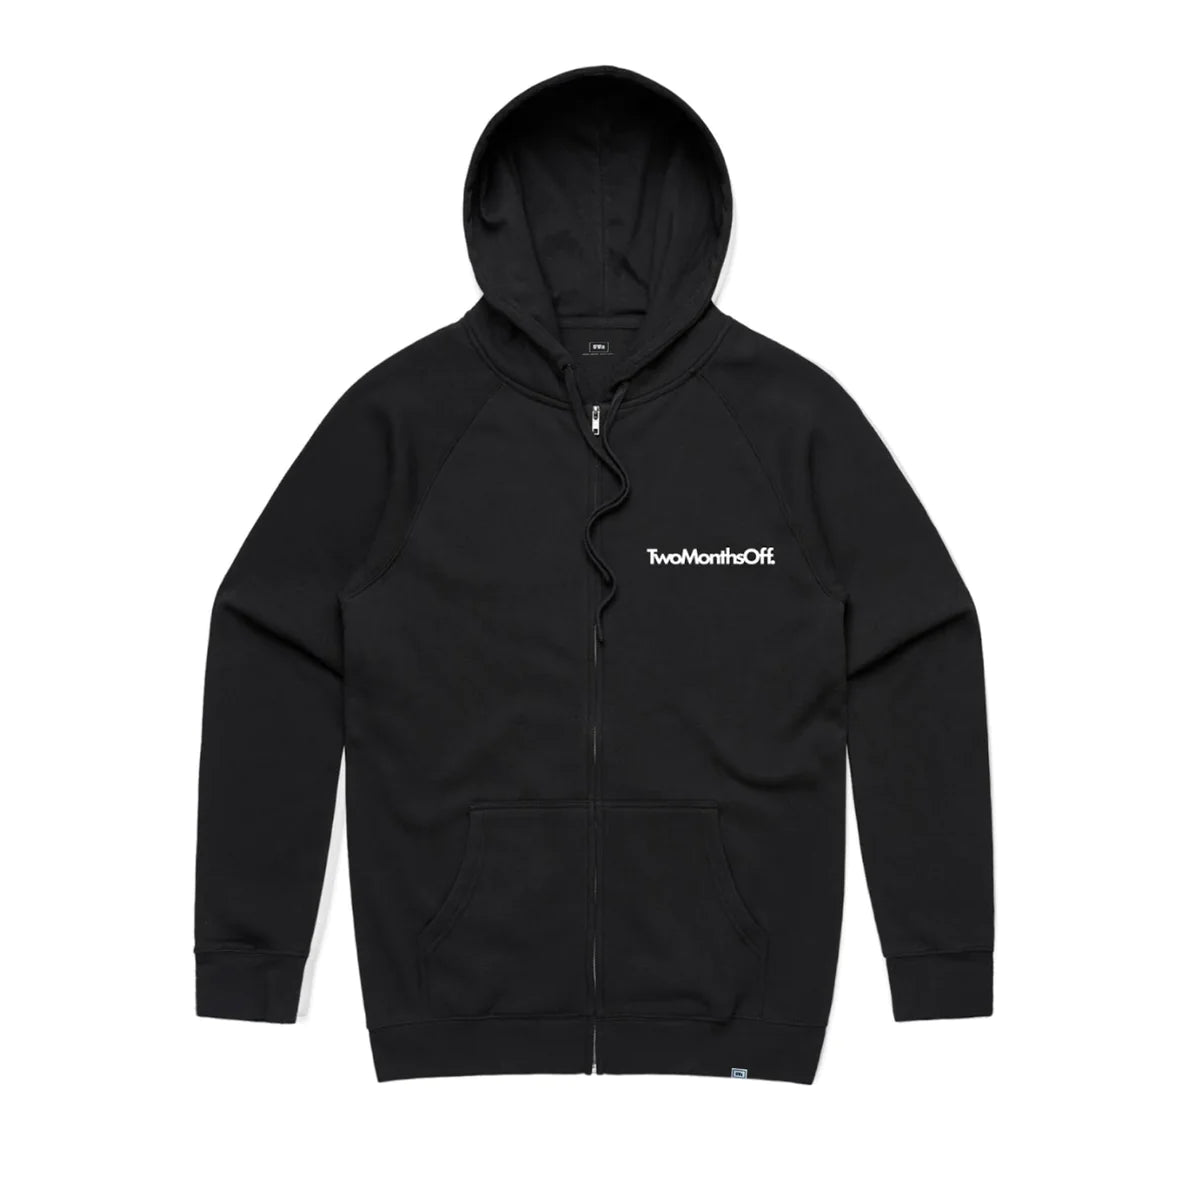 Underworld - *Two Months Off Limited Drop* You Bring Light In Hoodie